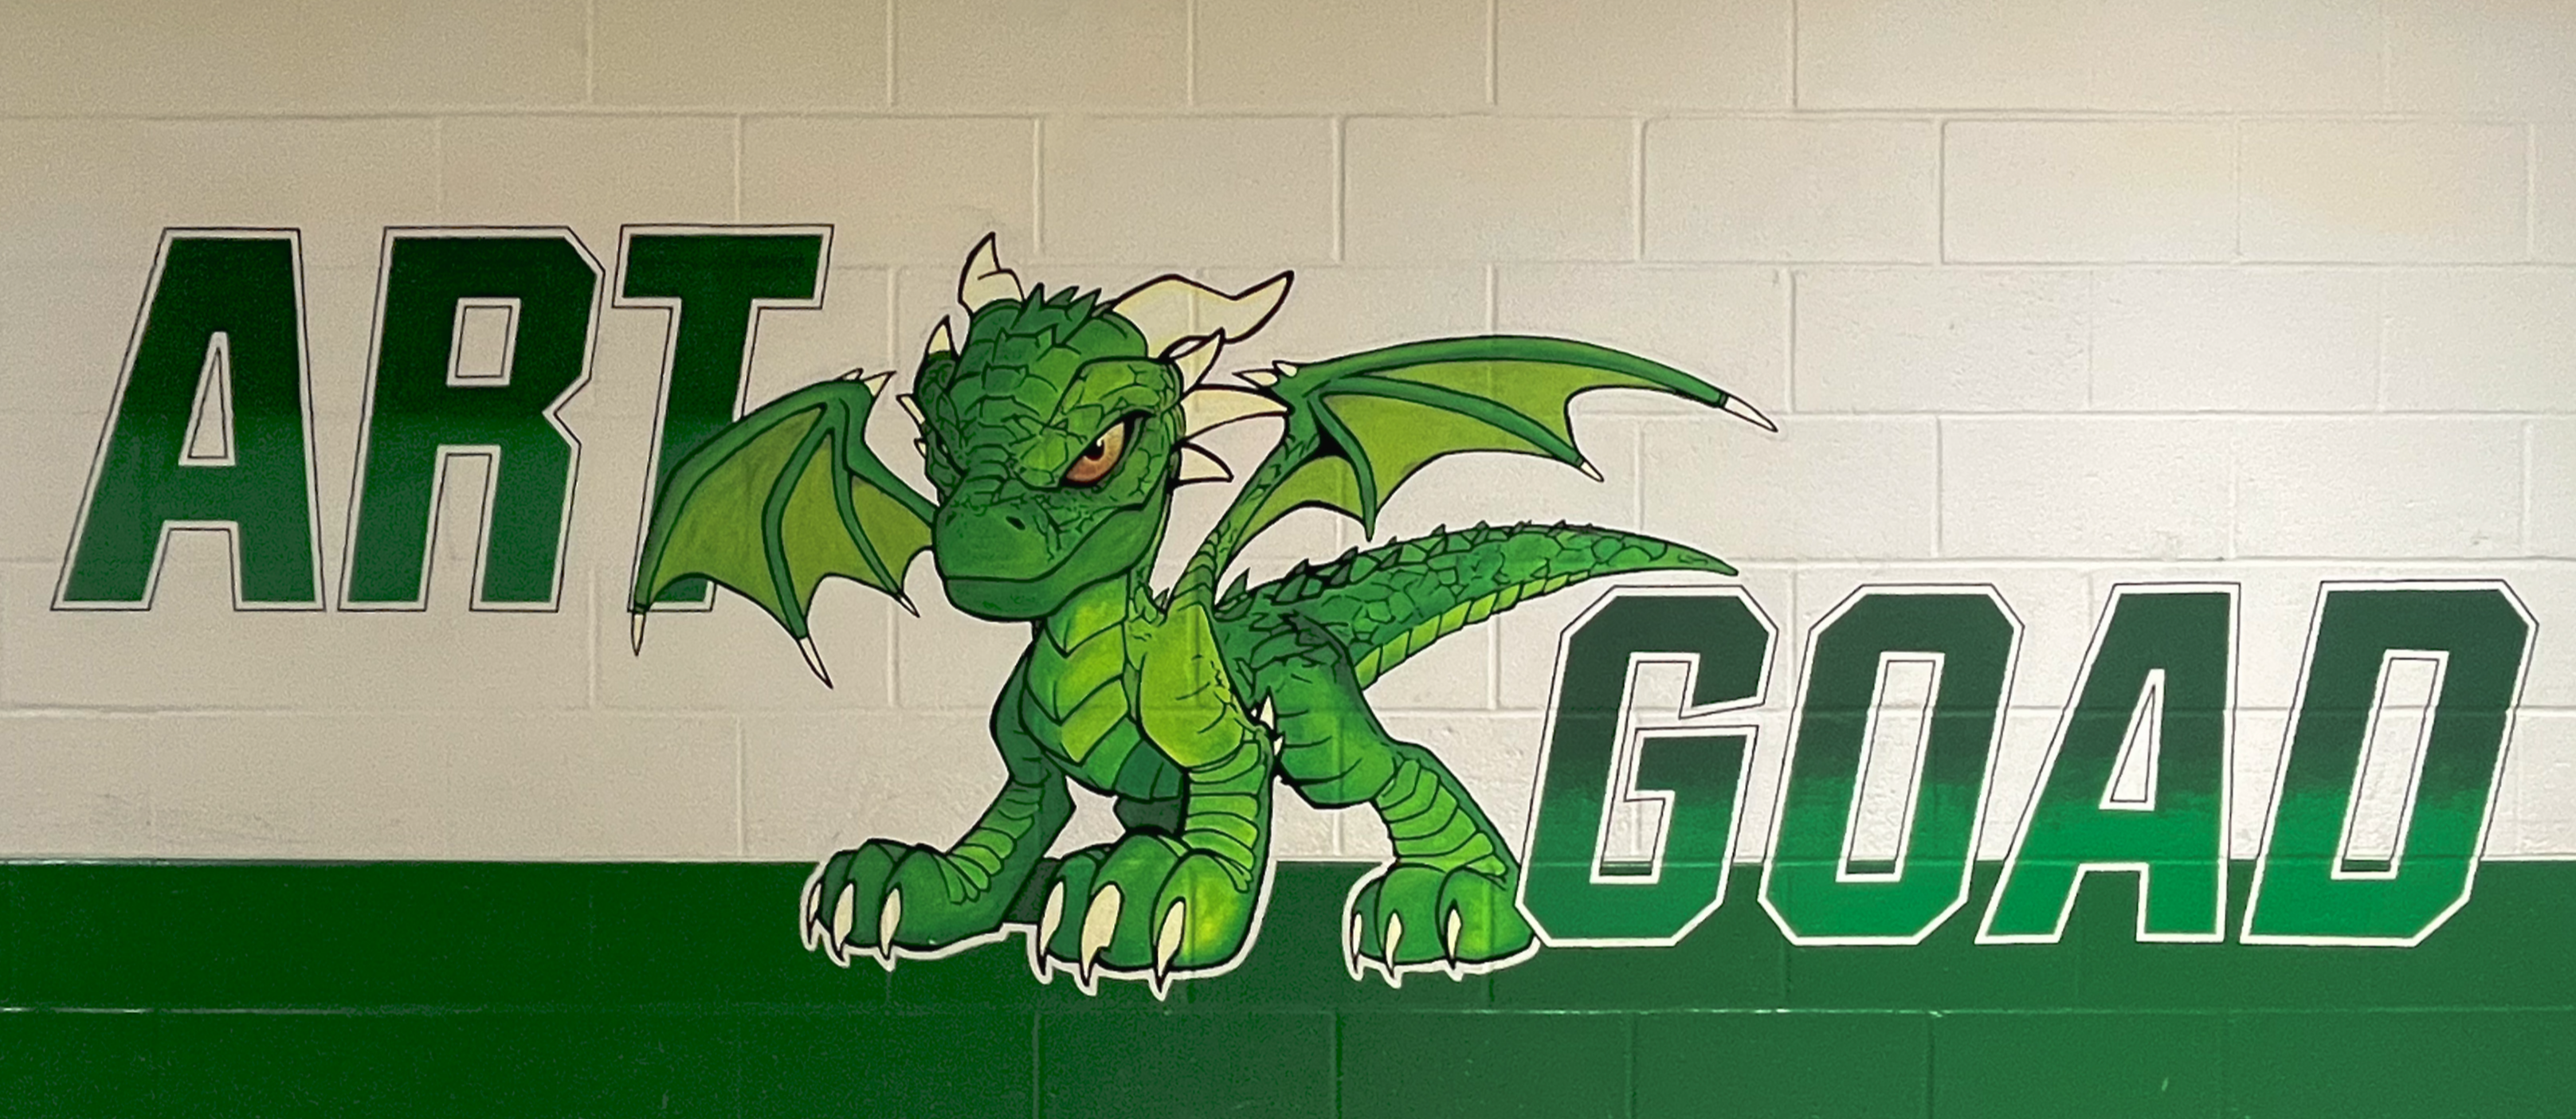 Young dragon mural painted on wall with the words Art Goad.